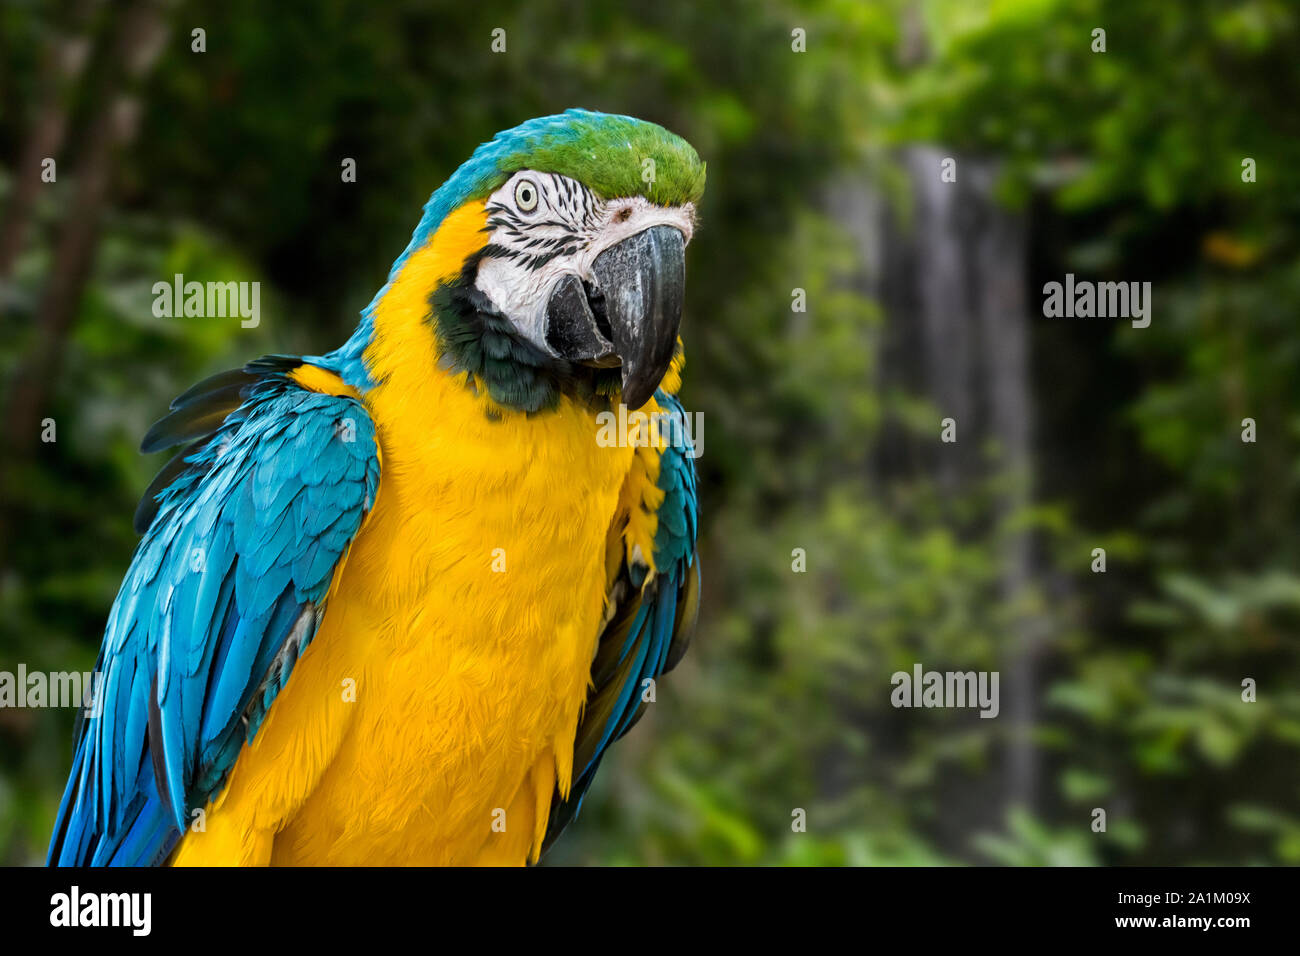 Blue-and-yellow macaw / blue-and-gold macaw (Ara ararauna) South American parrot native to Venezuela, Peru, Brazil, Bolivia, and Paraguay Stock Photo